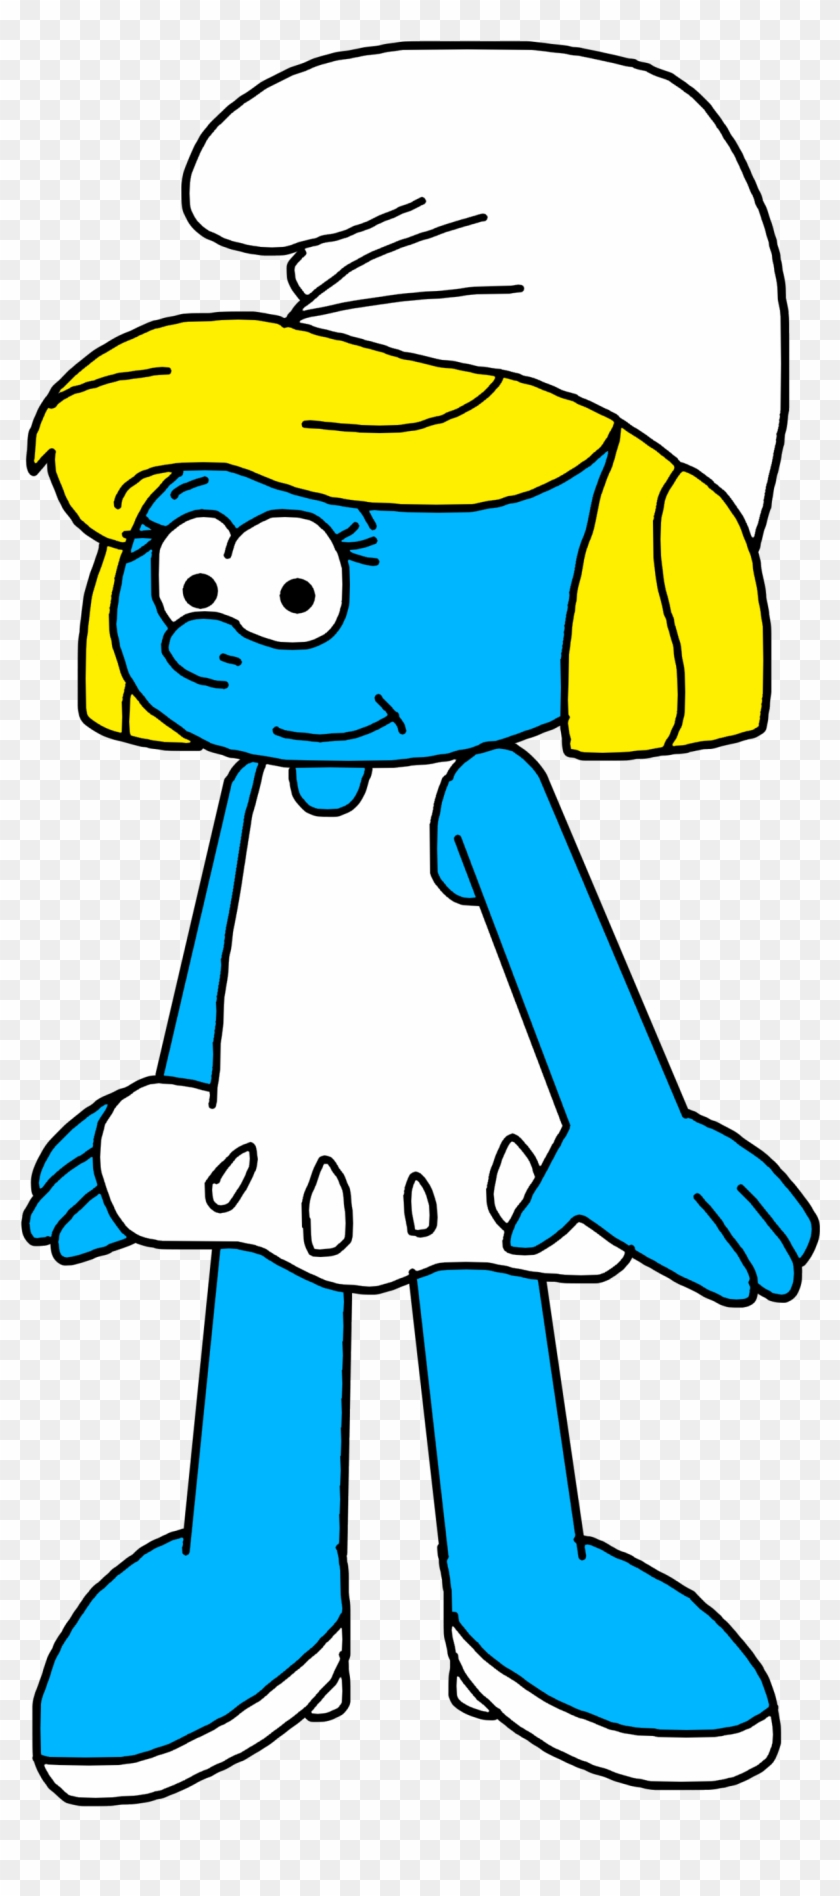 Smurfette With Her Hair Cut By Marcospower1996 - Smurfette Haircut #428677